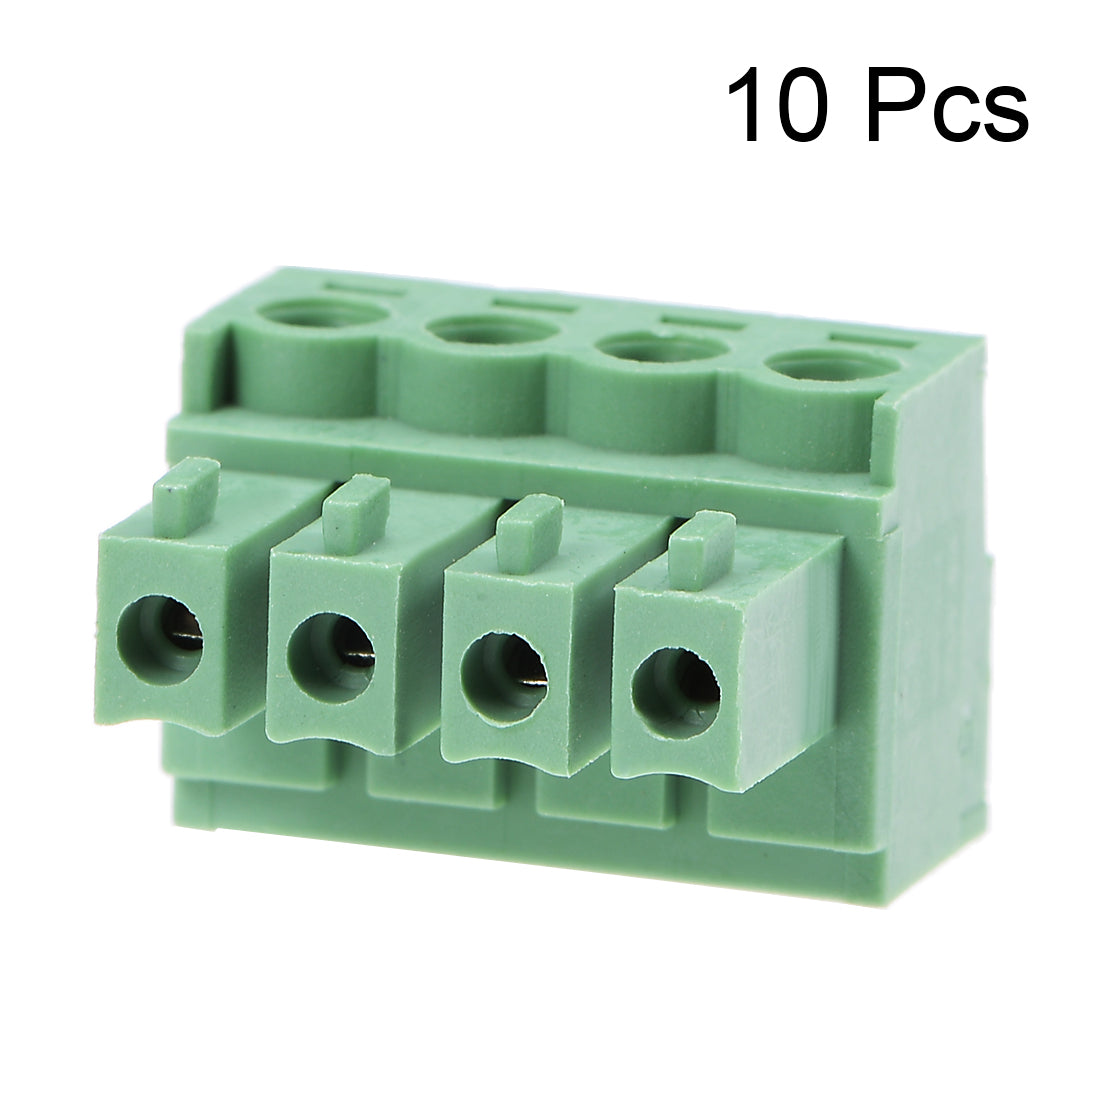 uxcell Uxcell 10Pcs AC 300V 8A 3.5mm Pitch 4P Needle Seat Insert-In PCB Terminal Block Green